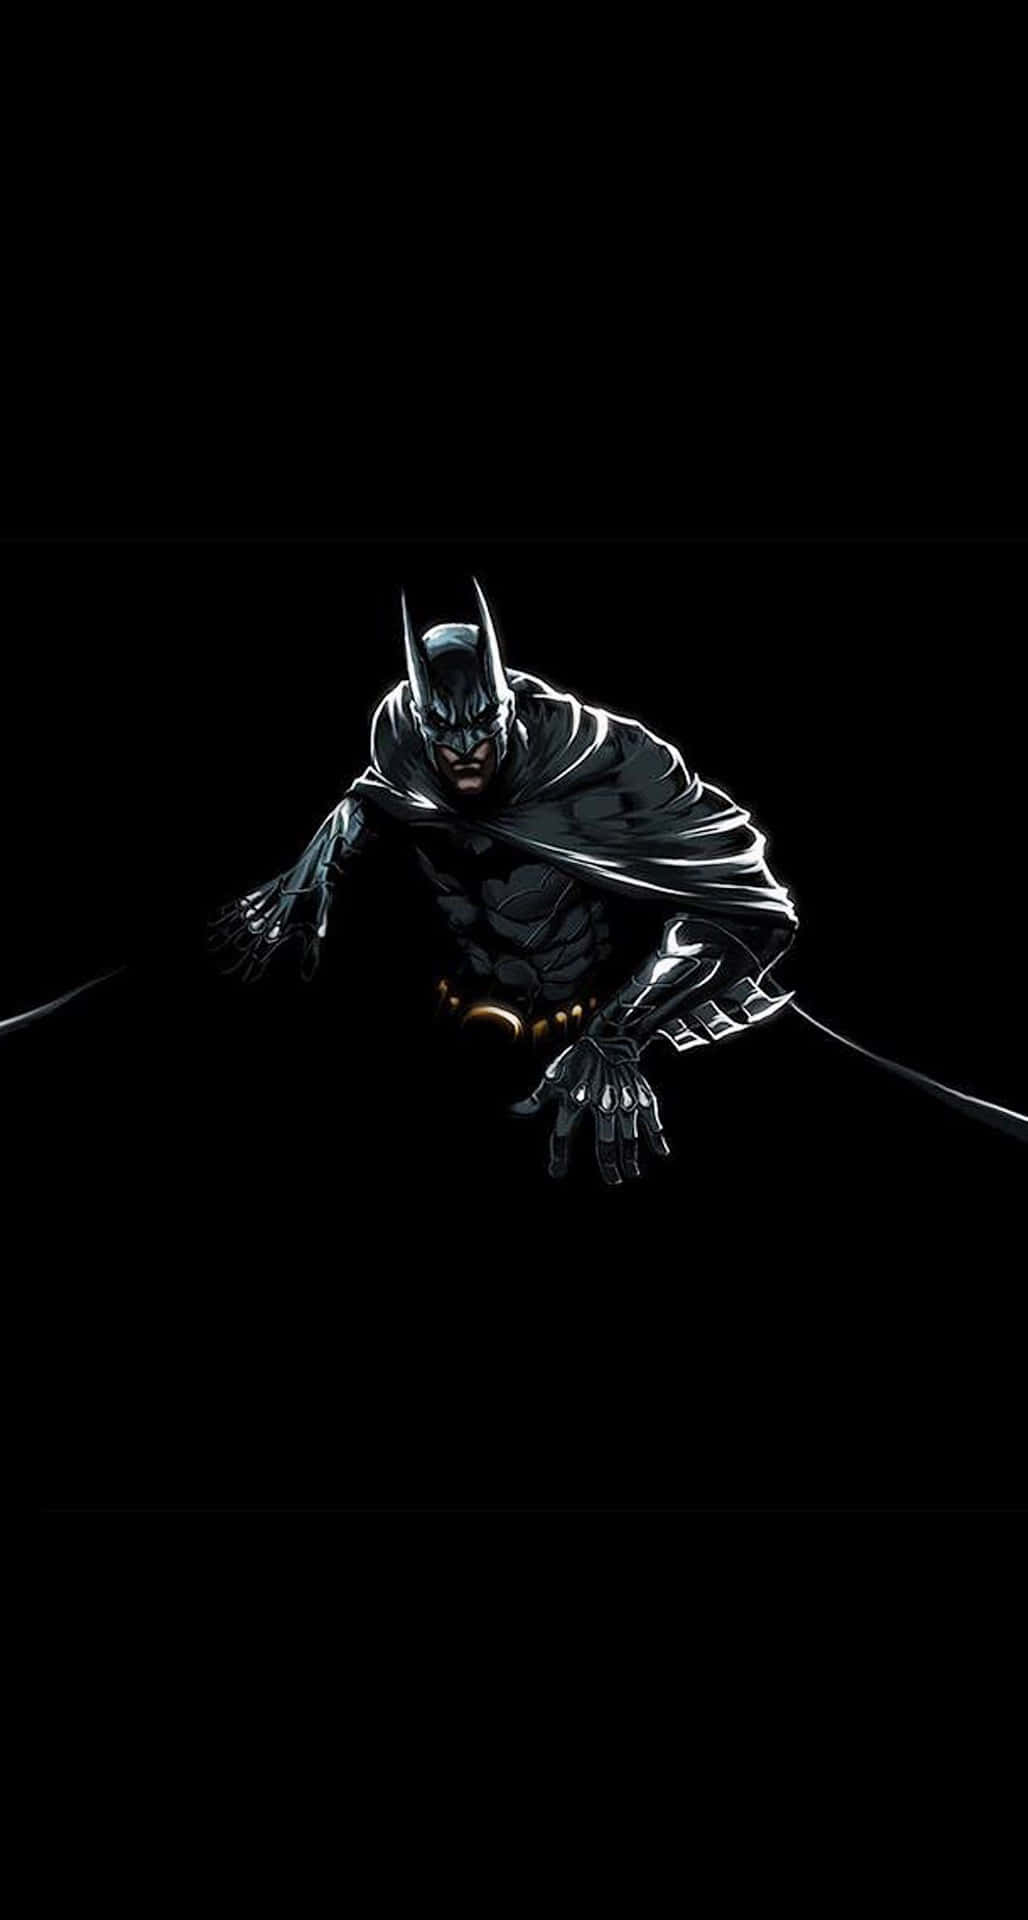 Get an awesome Batman decoration for your iPhone. Wallpaper